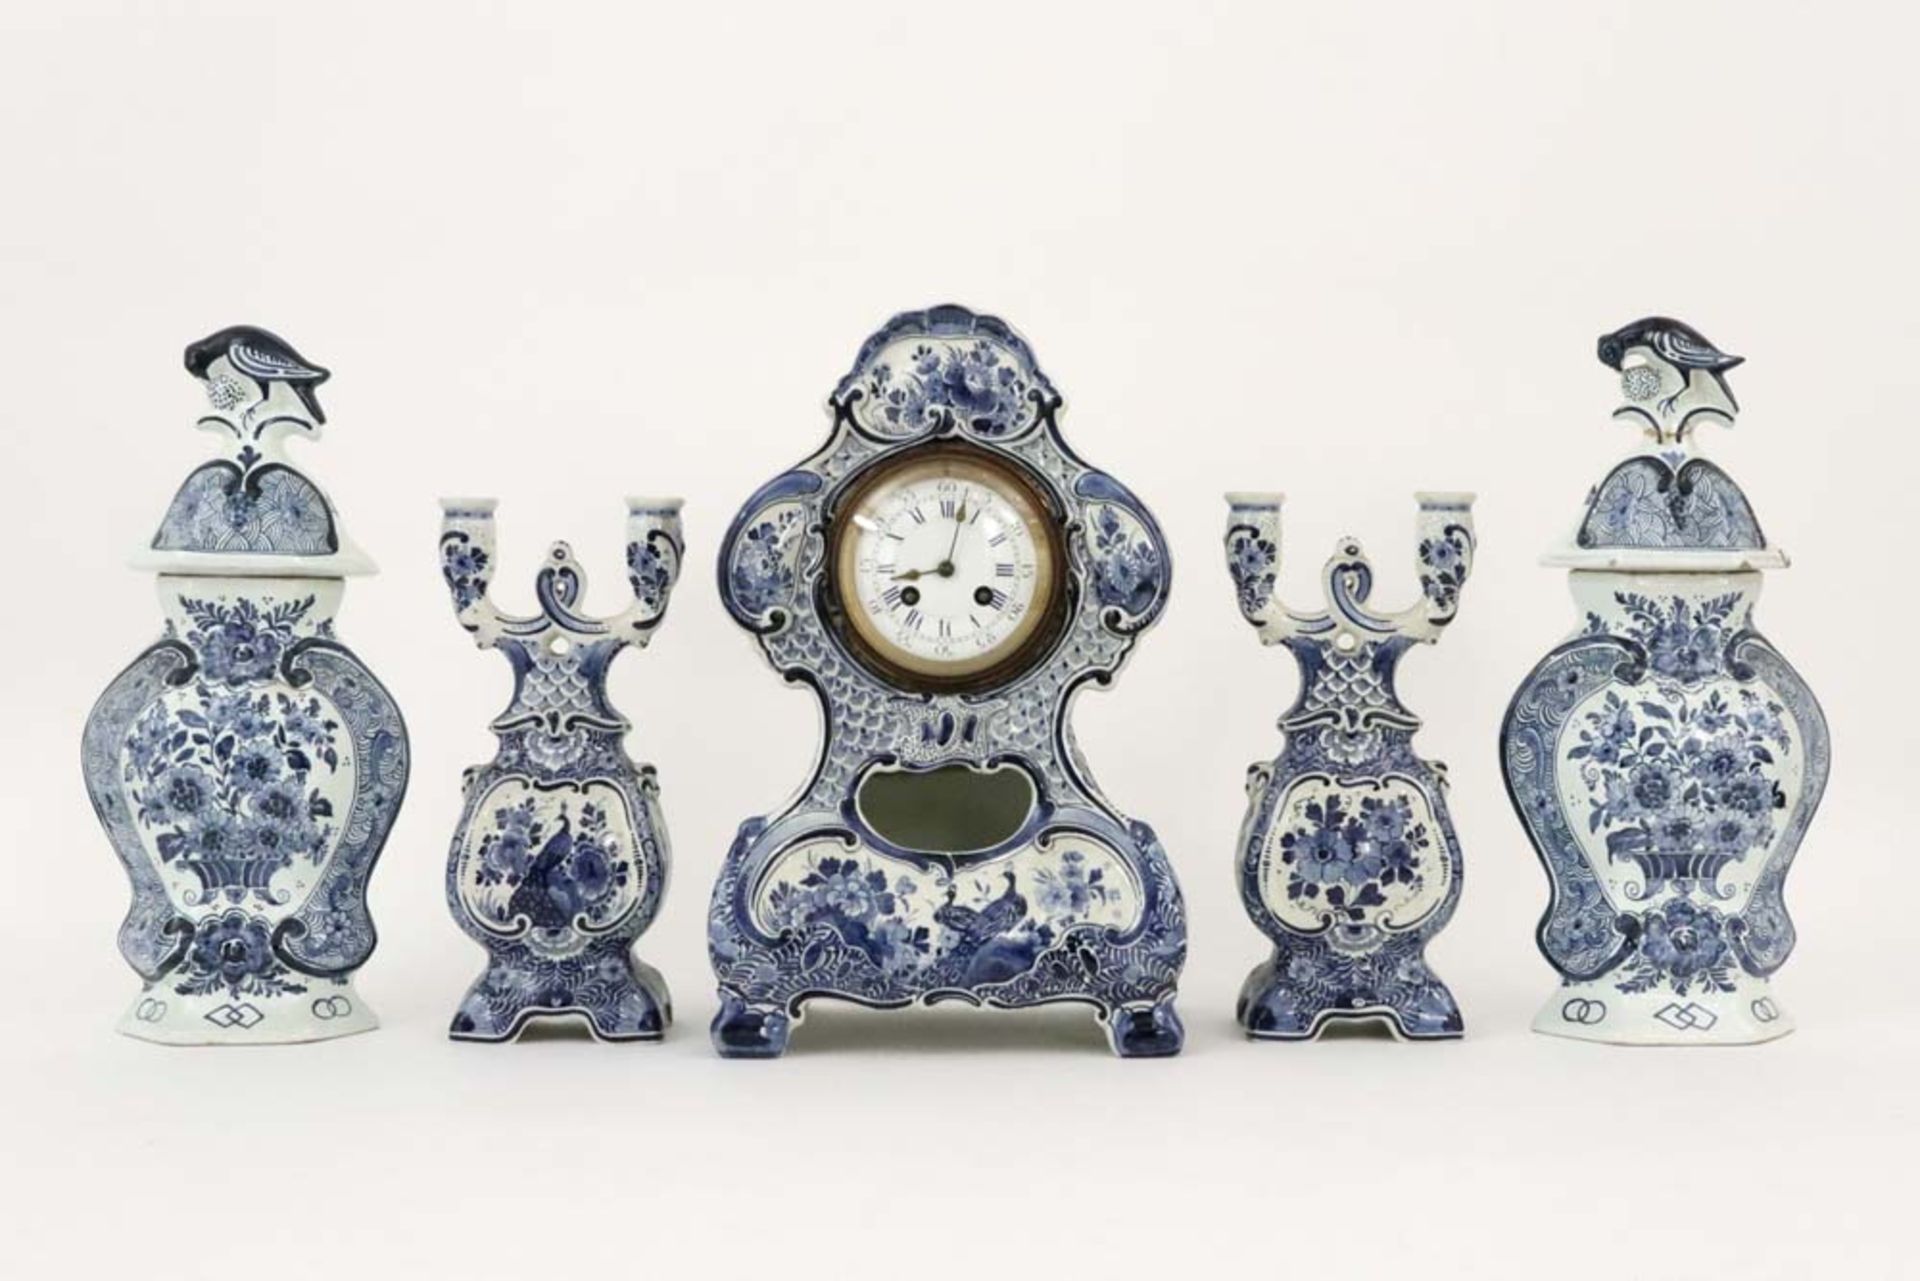 garniture and two lidded vases in marked ceramic from Delft || Lot met een driedelige